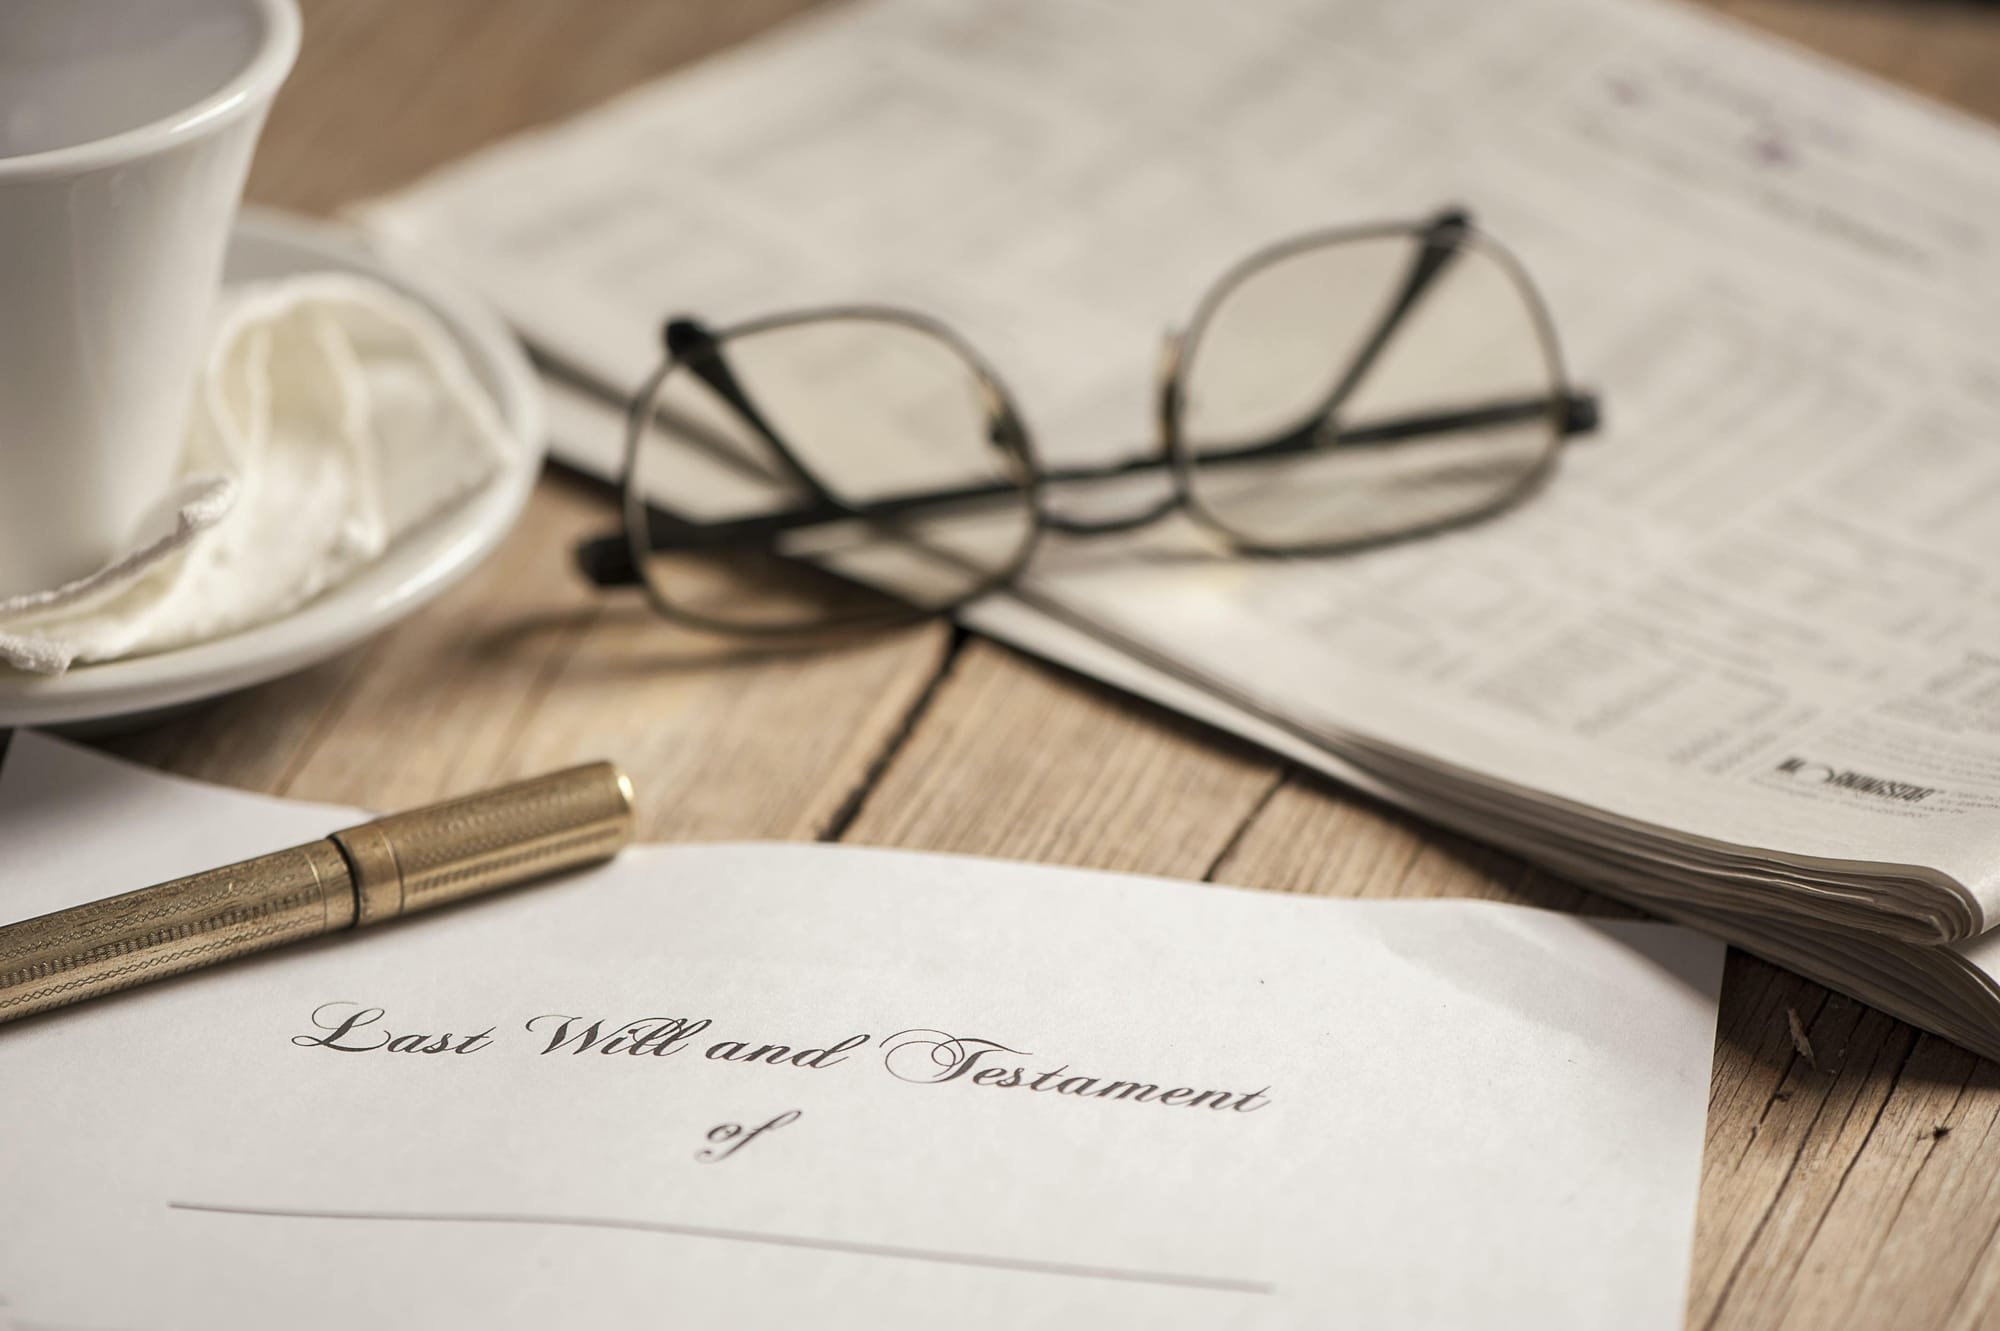 93 - The costs of implementing your will and bequeathing your estate